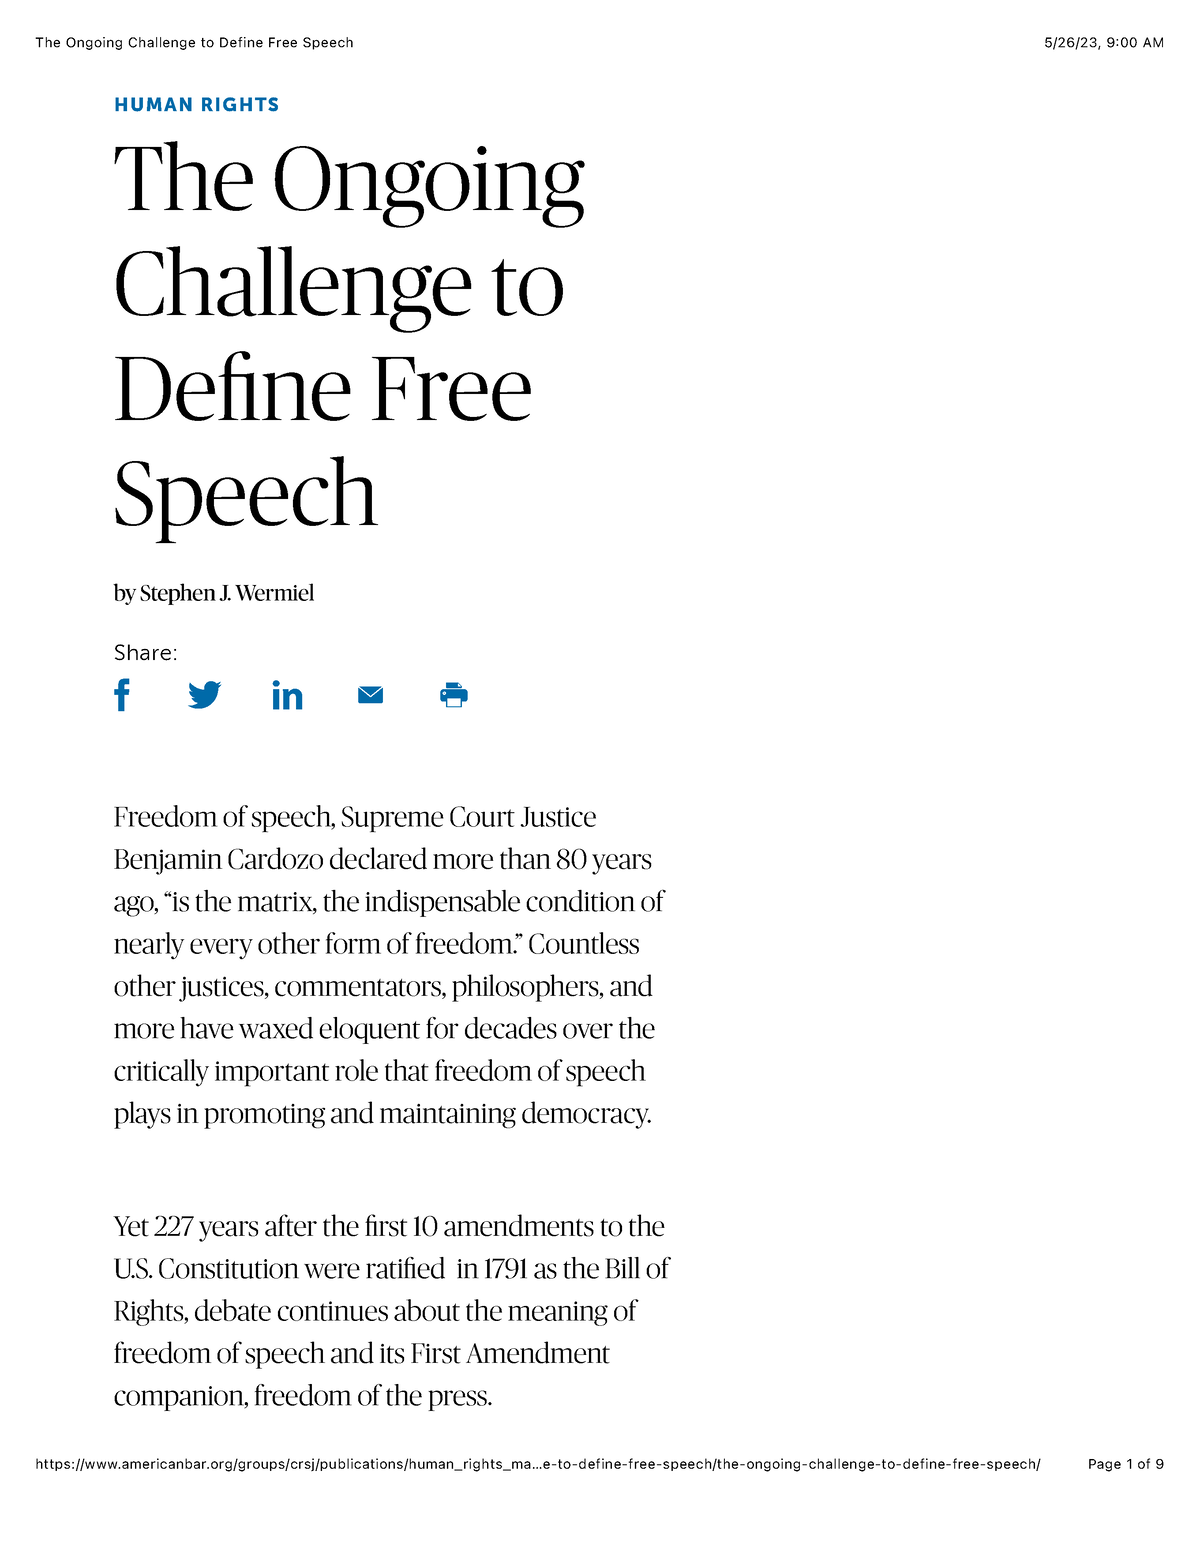 The Ongoing Challenge to Define Free Speech - HUMAN RIGHTS The Ongoing ...